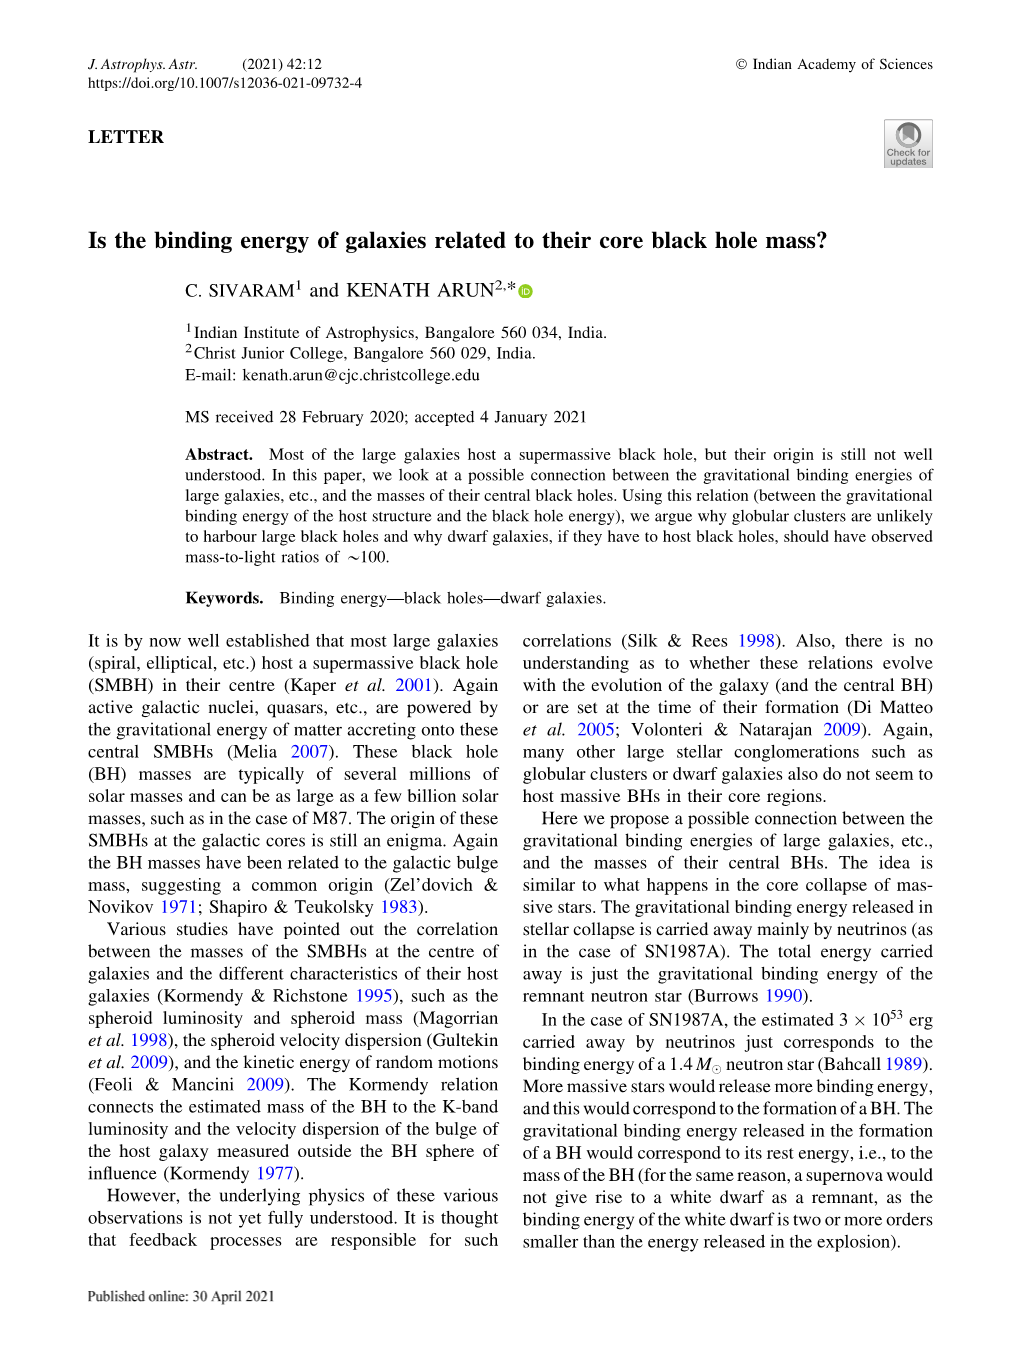 Is the Binding Energy of Galaxies Related to Their Core Black Hole Mass?